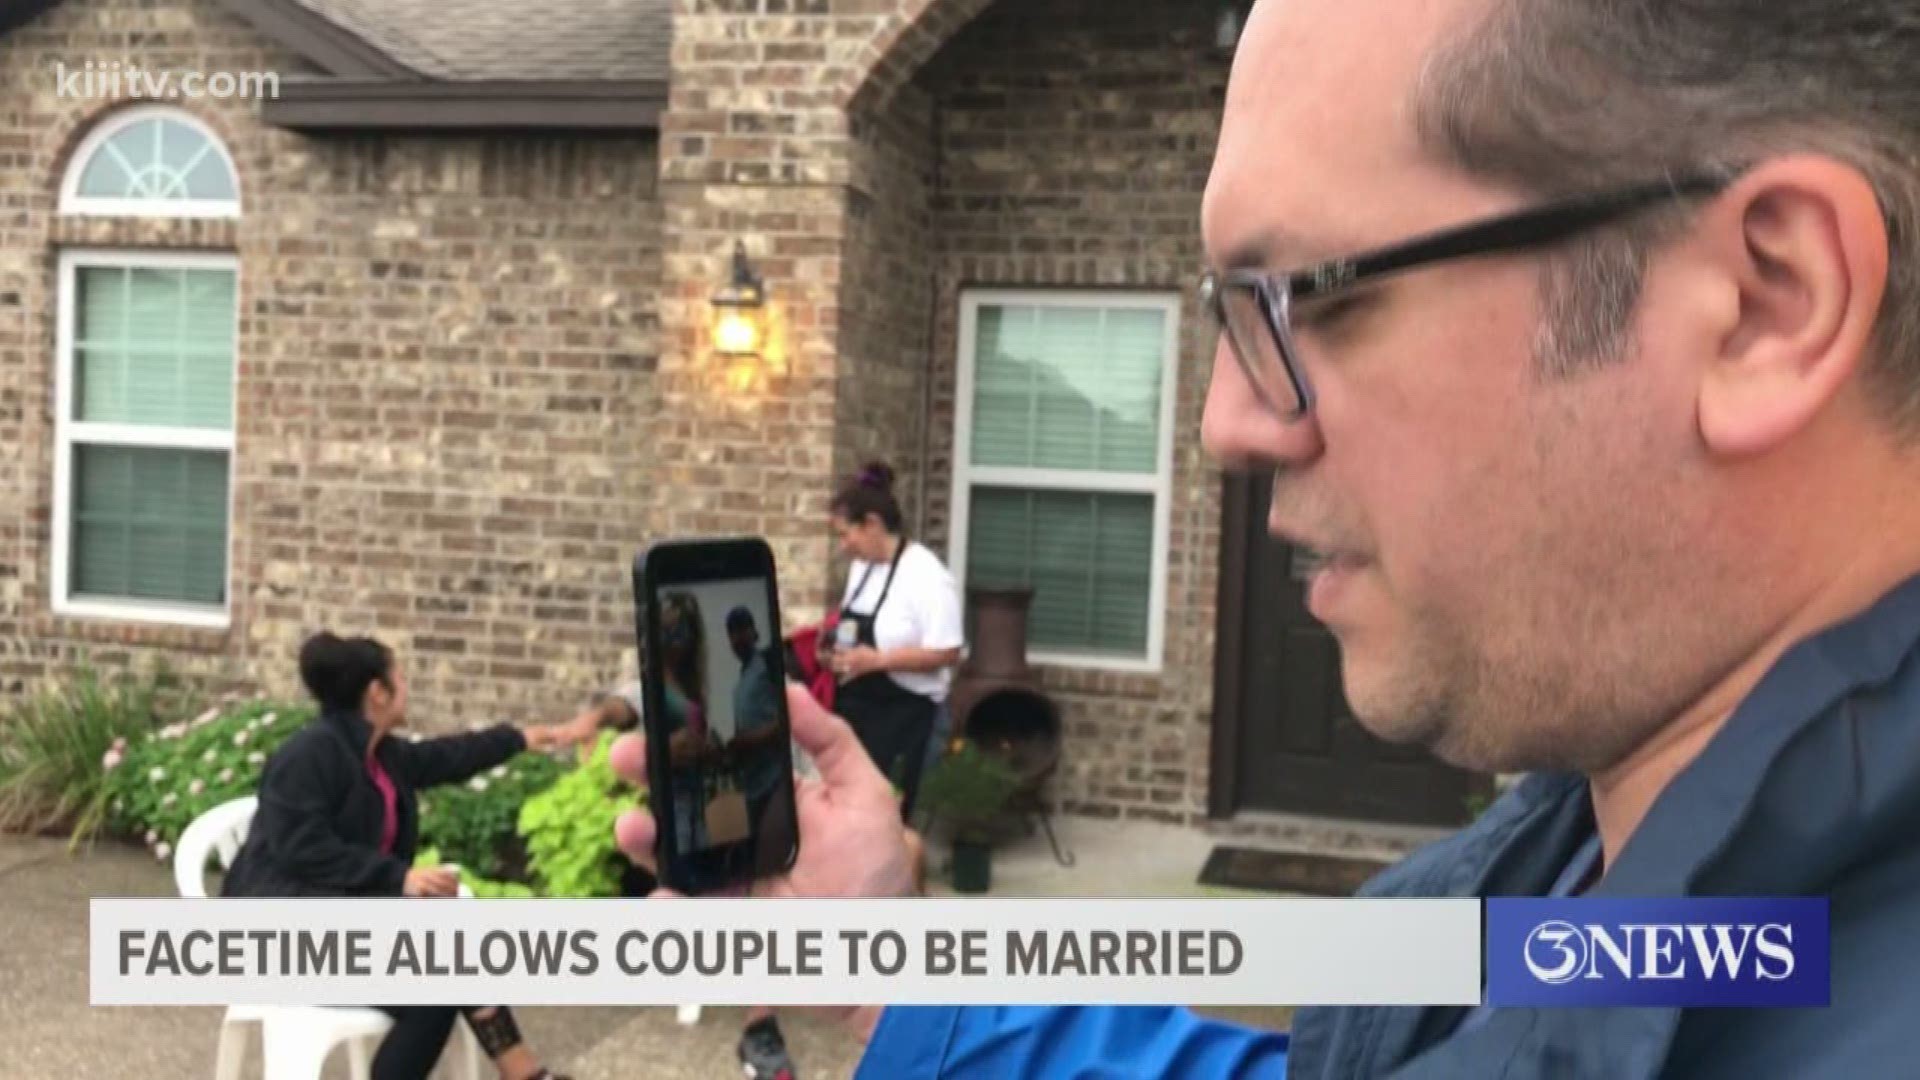 The happy couple was able to celebrate their love in a special ceremony officiated by one of 3News own anchors.